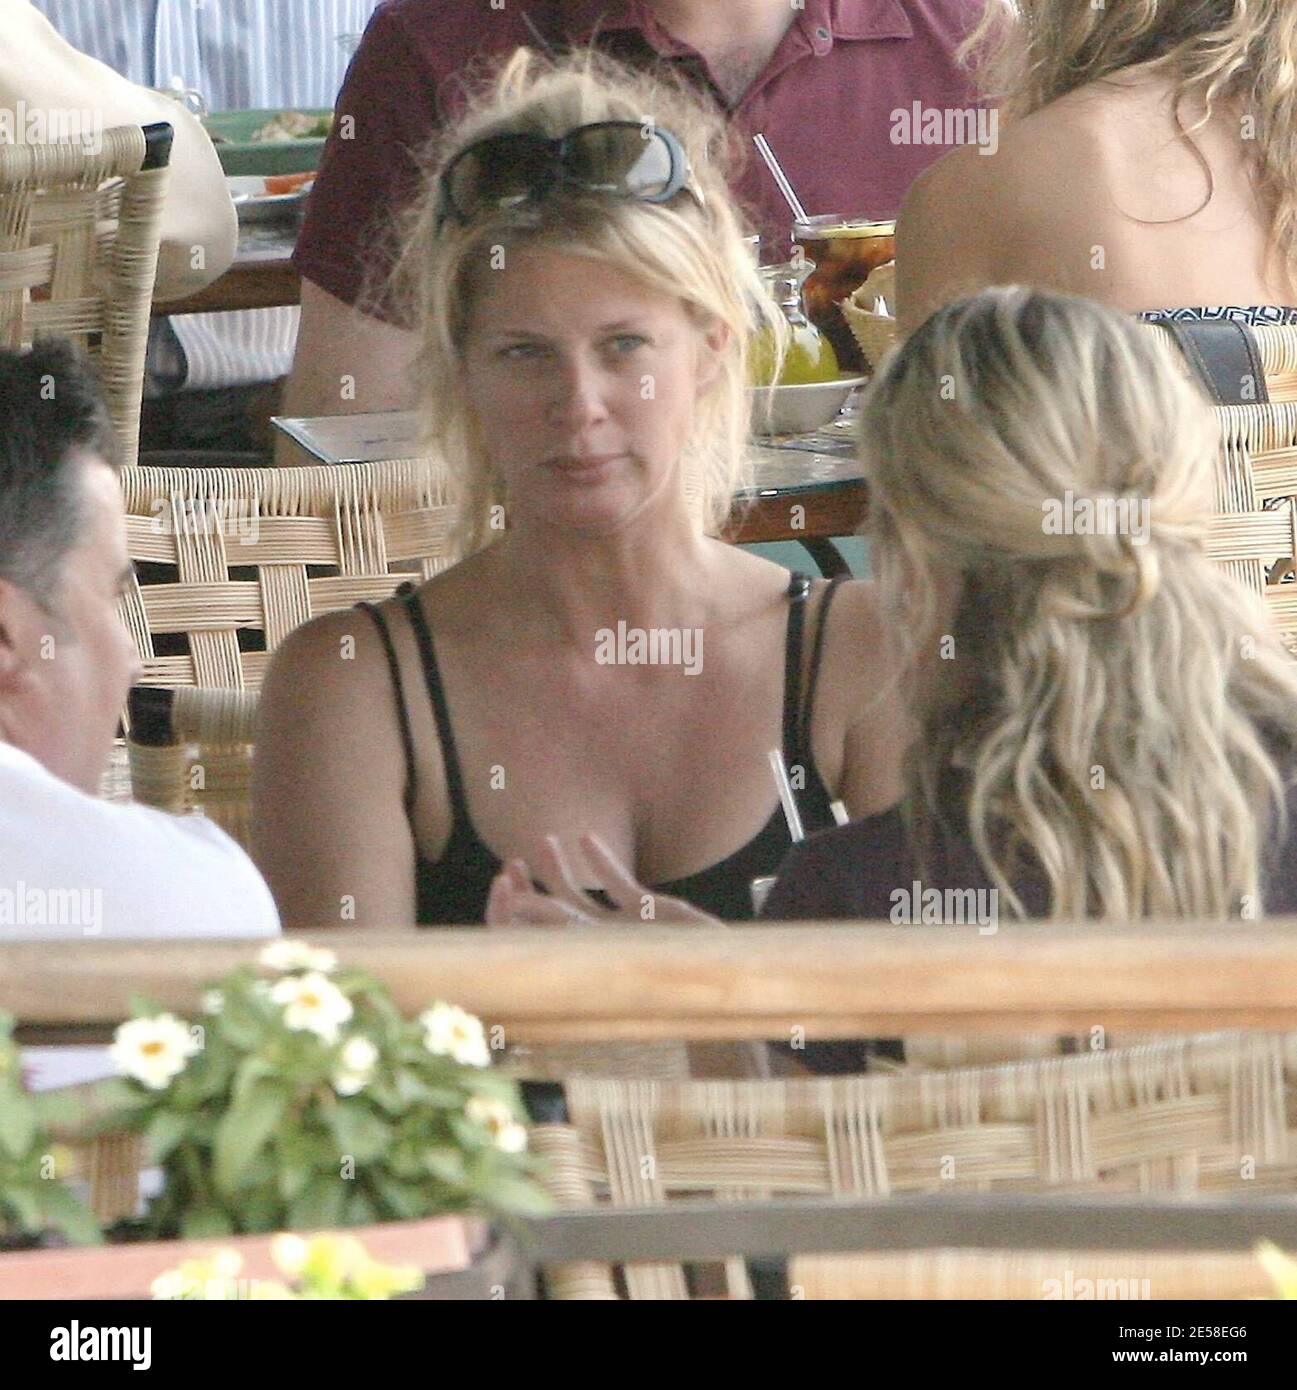 Rachel Hunter and British DIY expert and tv presenter, Phil Turner, lunch at Cafe Med with friends. 'We have a new reality show,' they joked. 'We can't talk about it, it's top secret' added Turner giggling with Hunter as they left. West Hollywood, Calif. 7/25/07.  [[rac ral]] Stock Photo